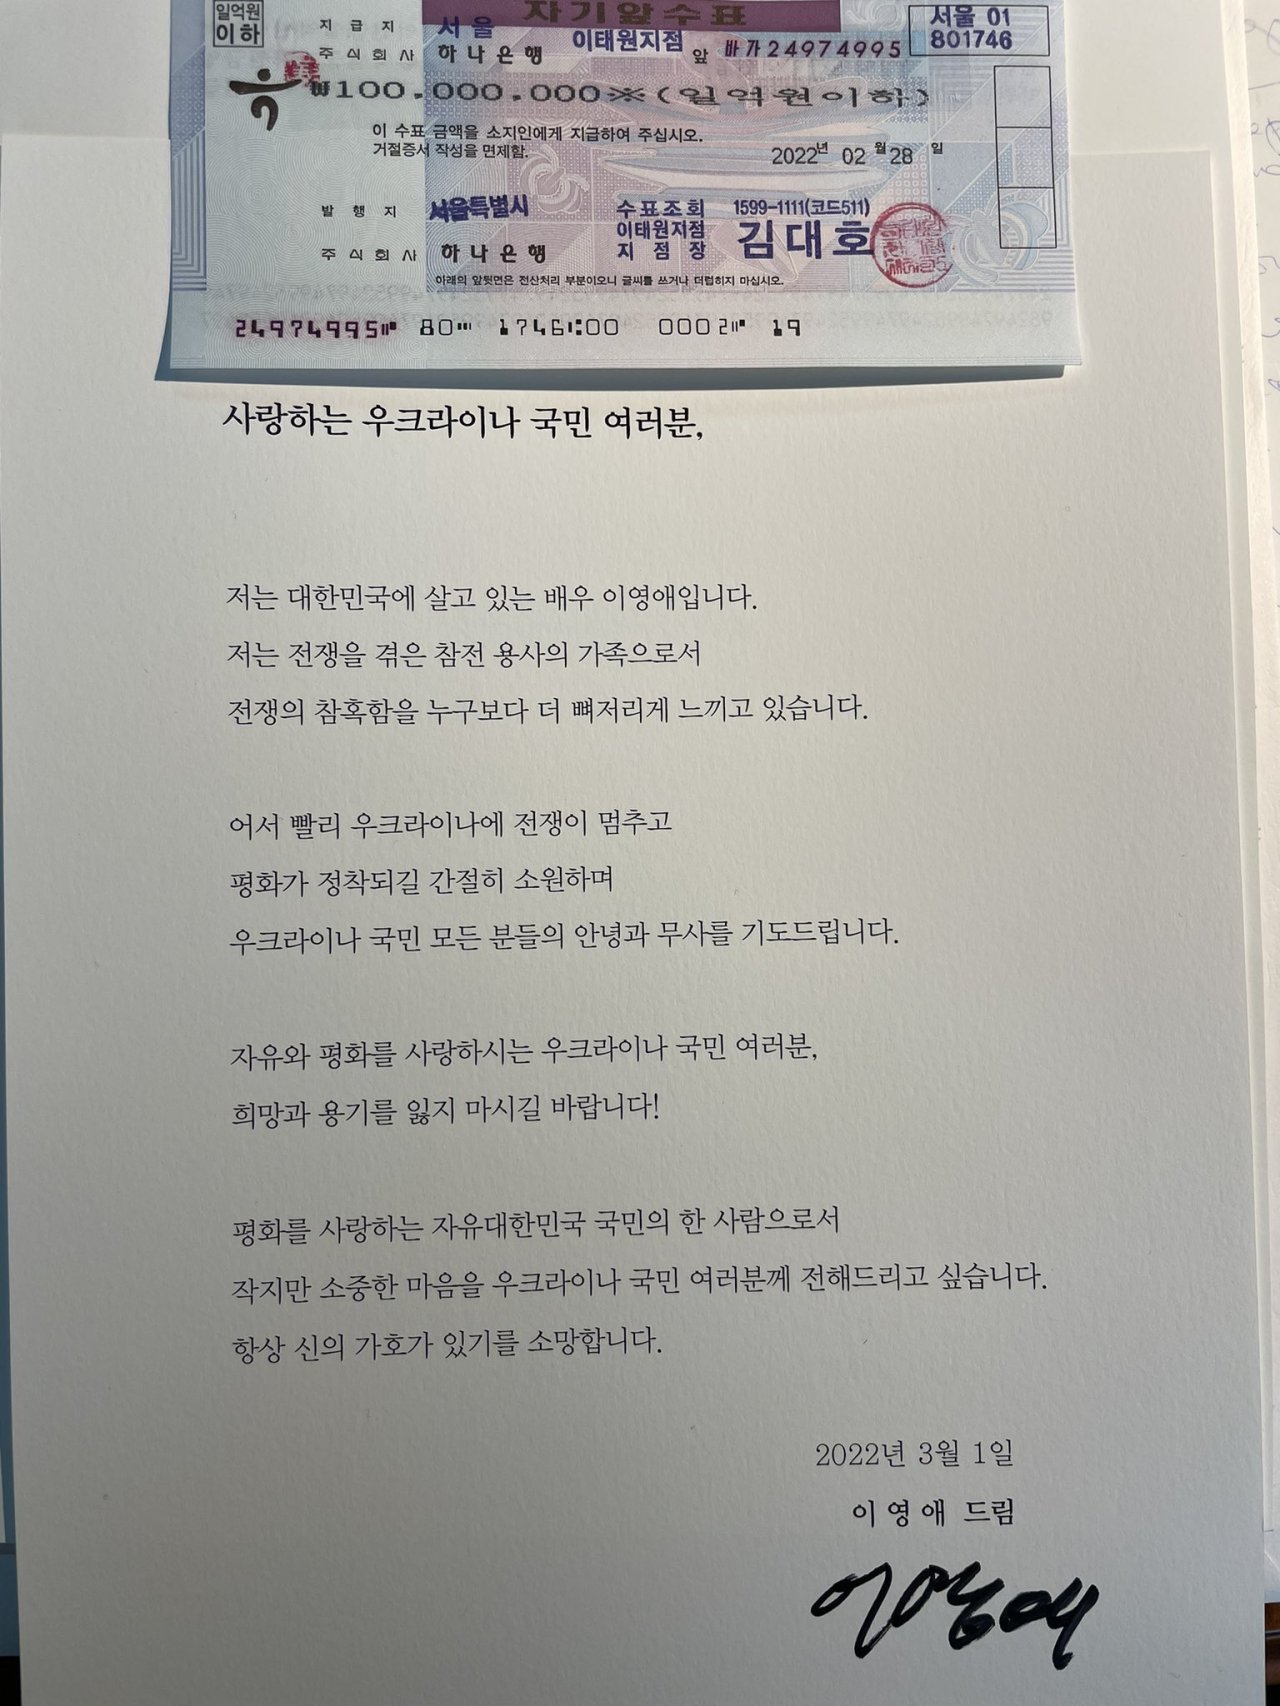 Actress‘s Lee Young-ae’s letter and check of 100 million won sent to Ukraine embassy in South Korea. (Twitter account of Ukraine Ambassador Dmytro Ponomarenko)